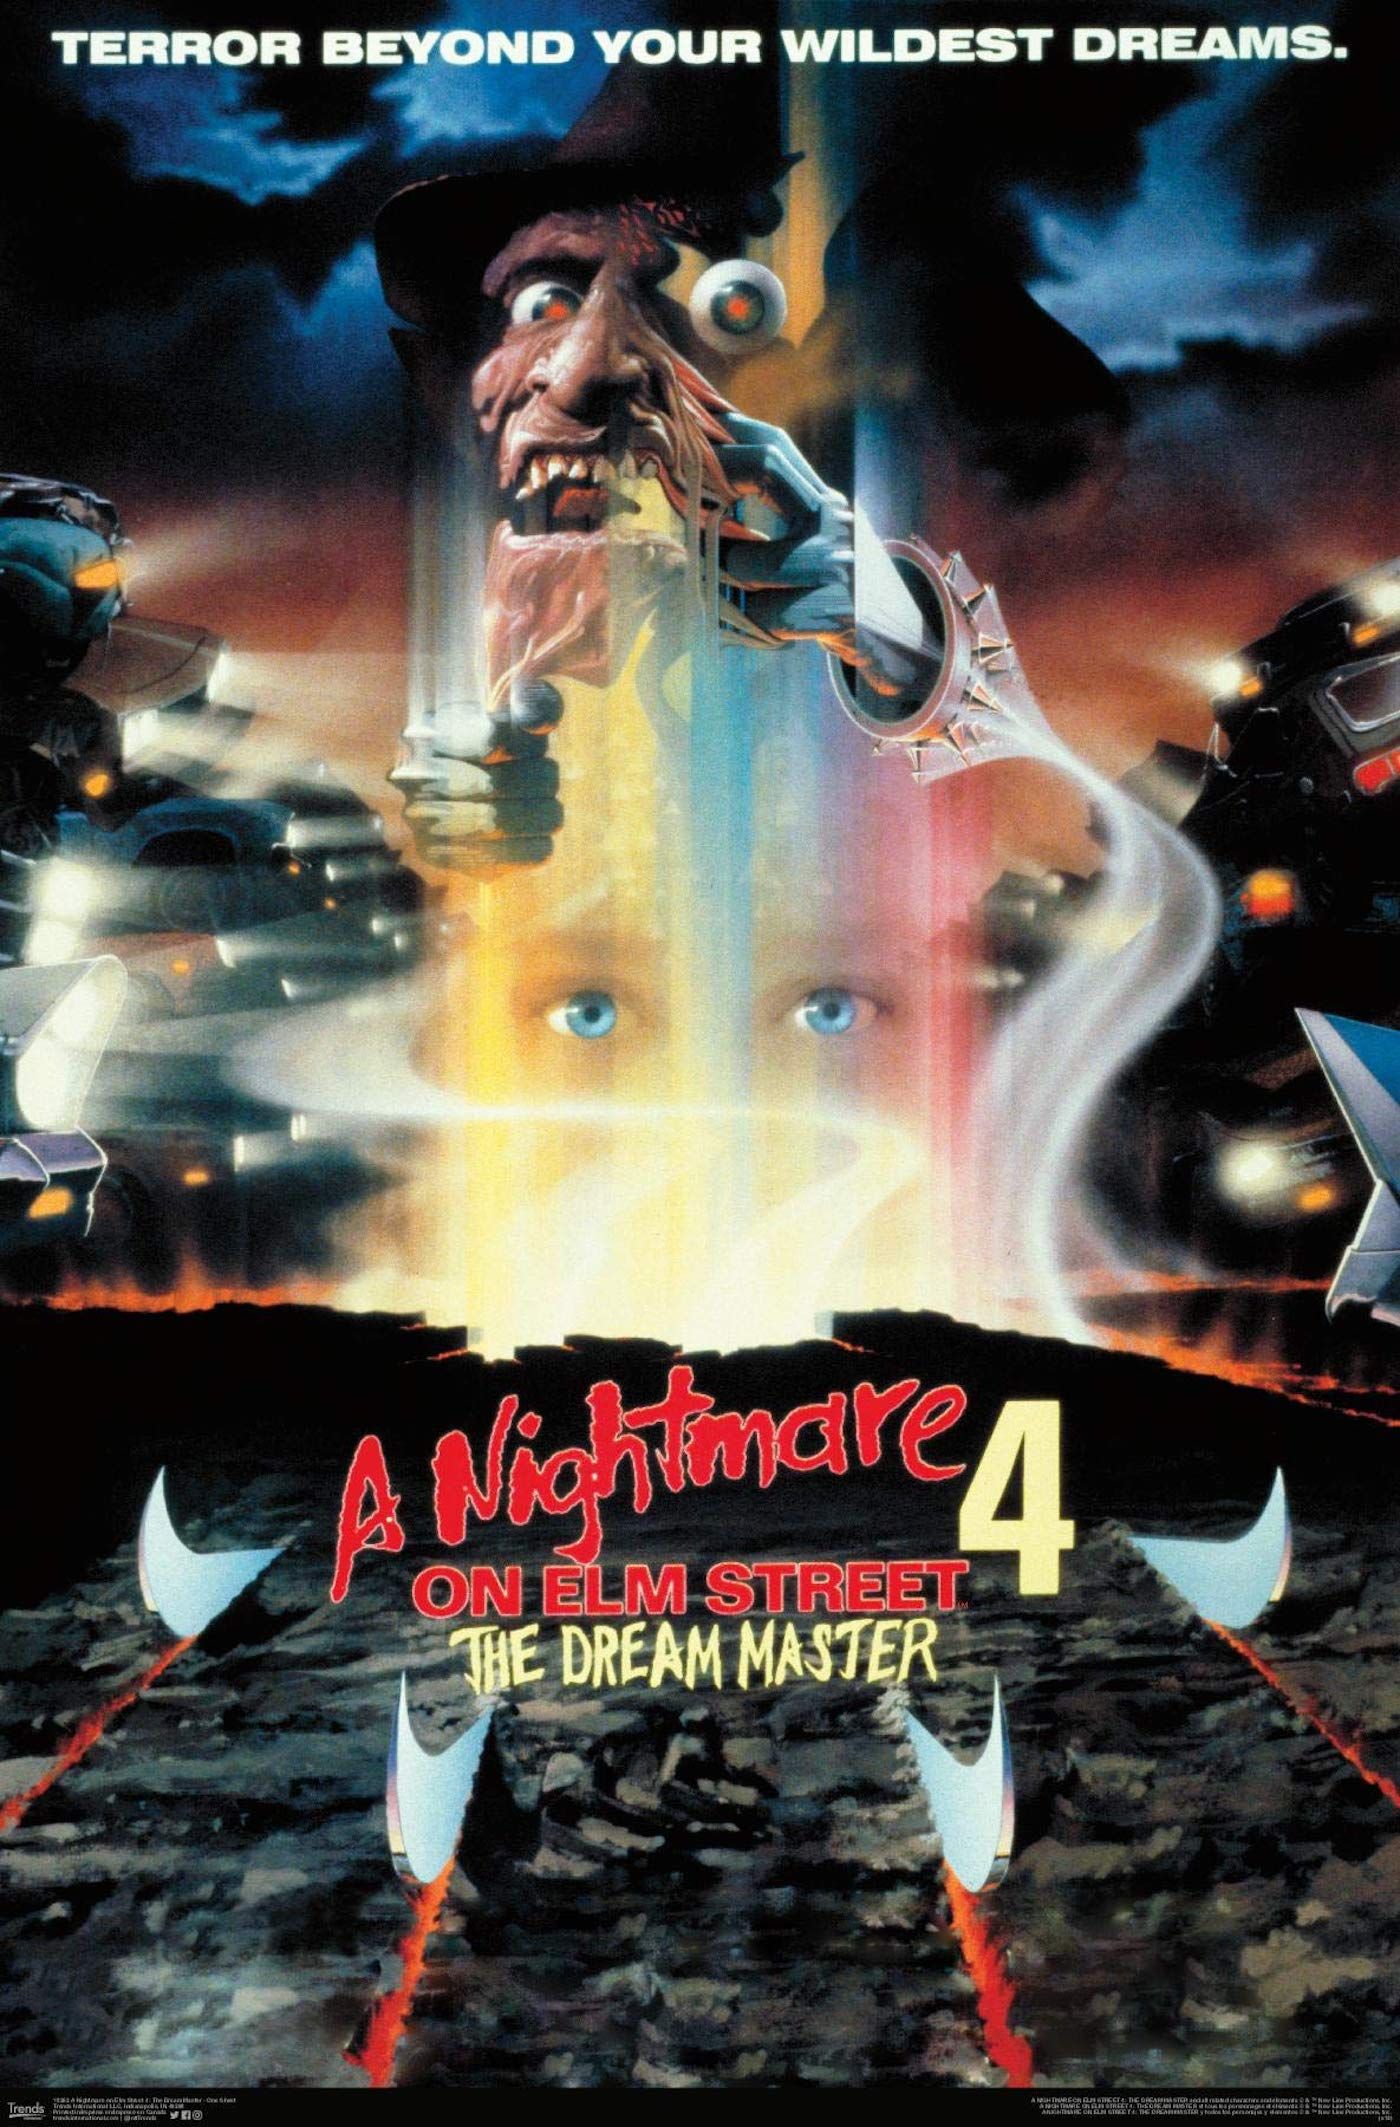 A Nightmare on Elm Street 4- The Dream Master poster